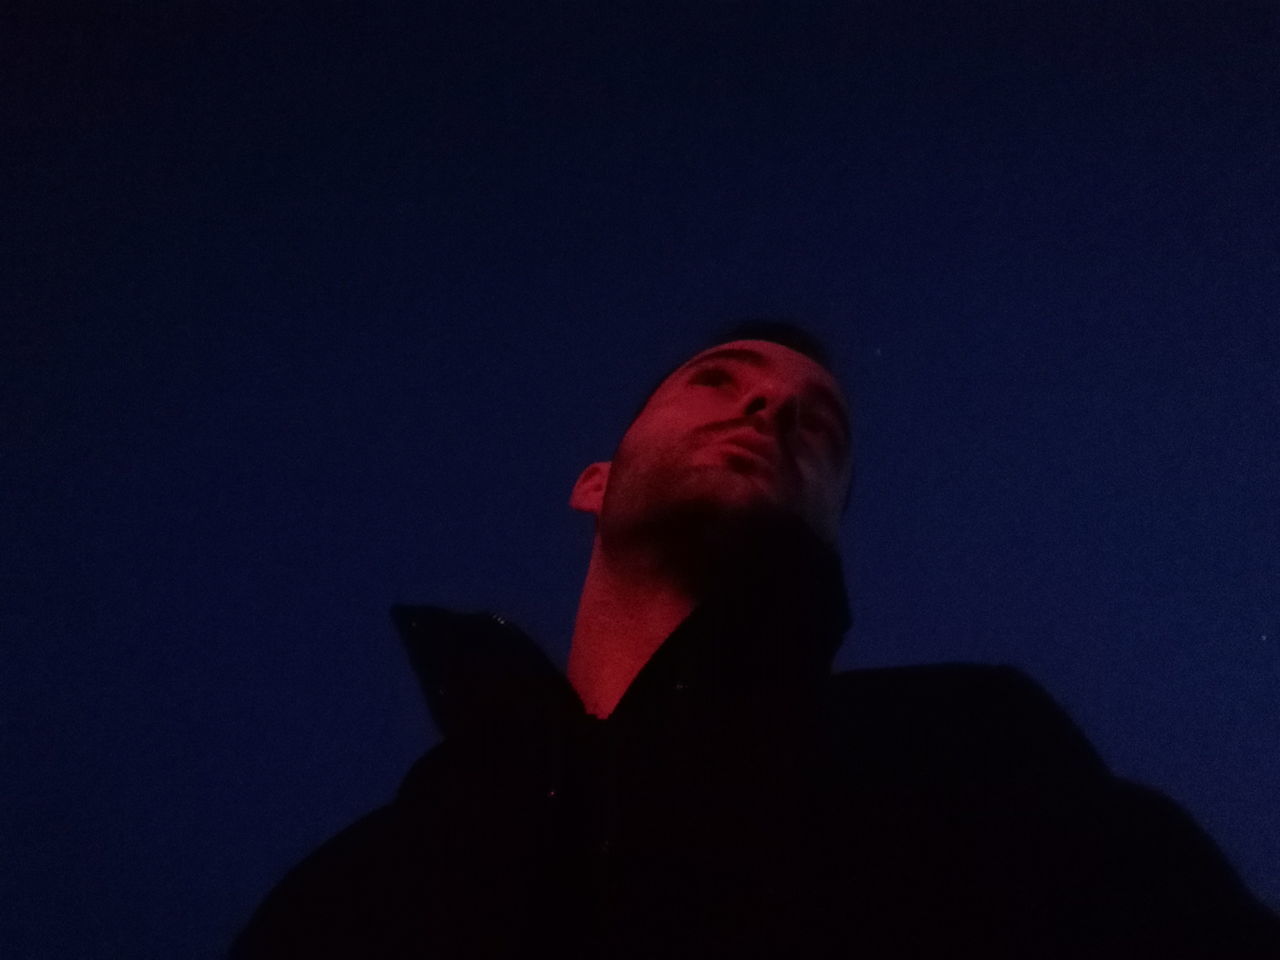 LOW ANGLE PORTRAIT OF MAN AGAINST BLUE SKY AT NIGHT